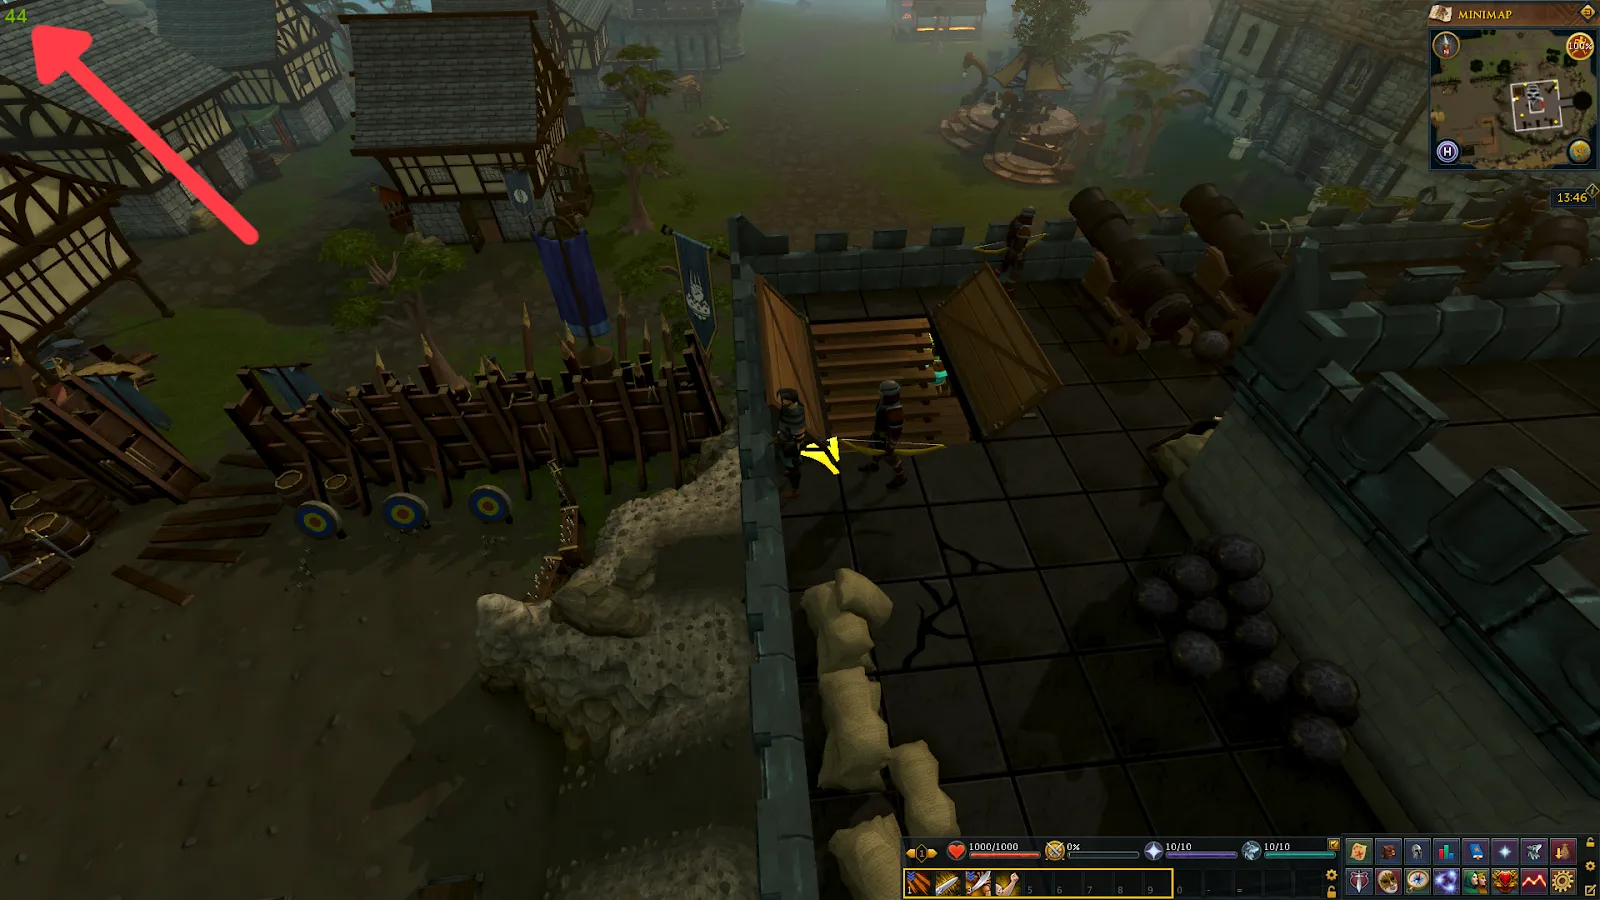 GeForce Experience show FPS in Runescape demonstration image